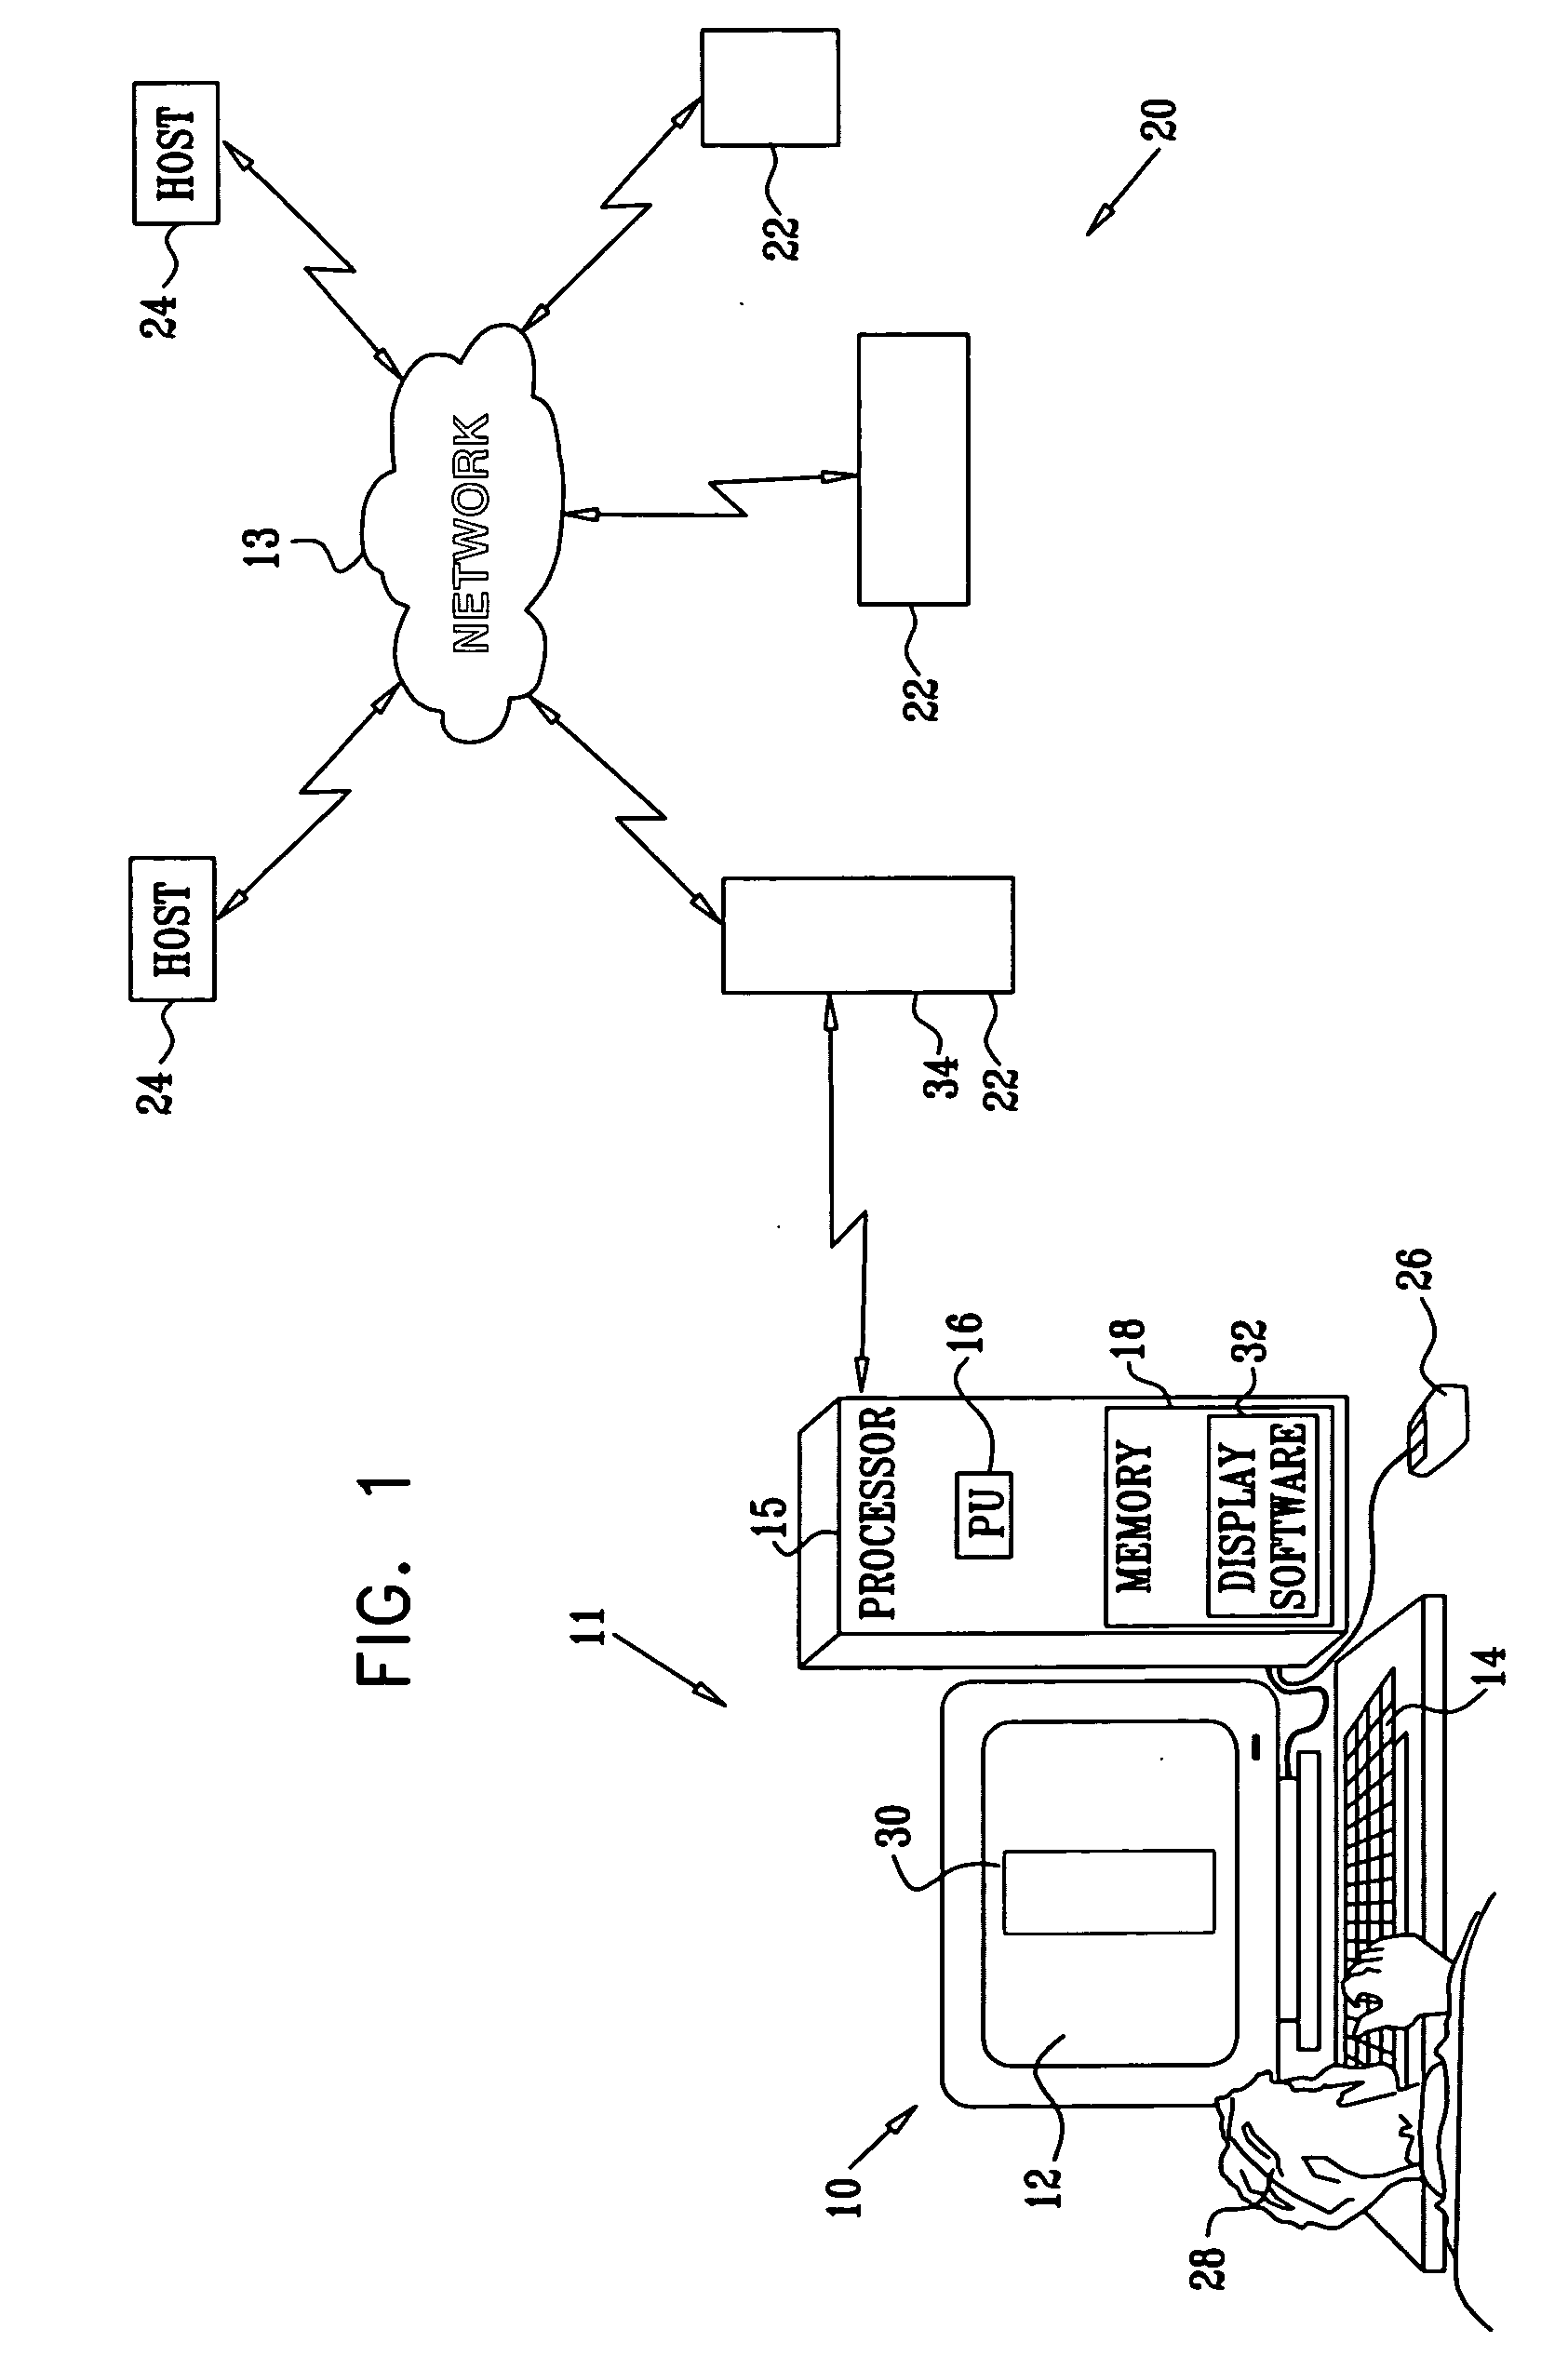 Graphic user interface for a storage system